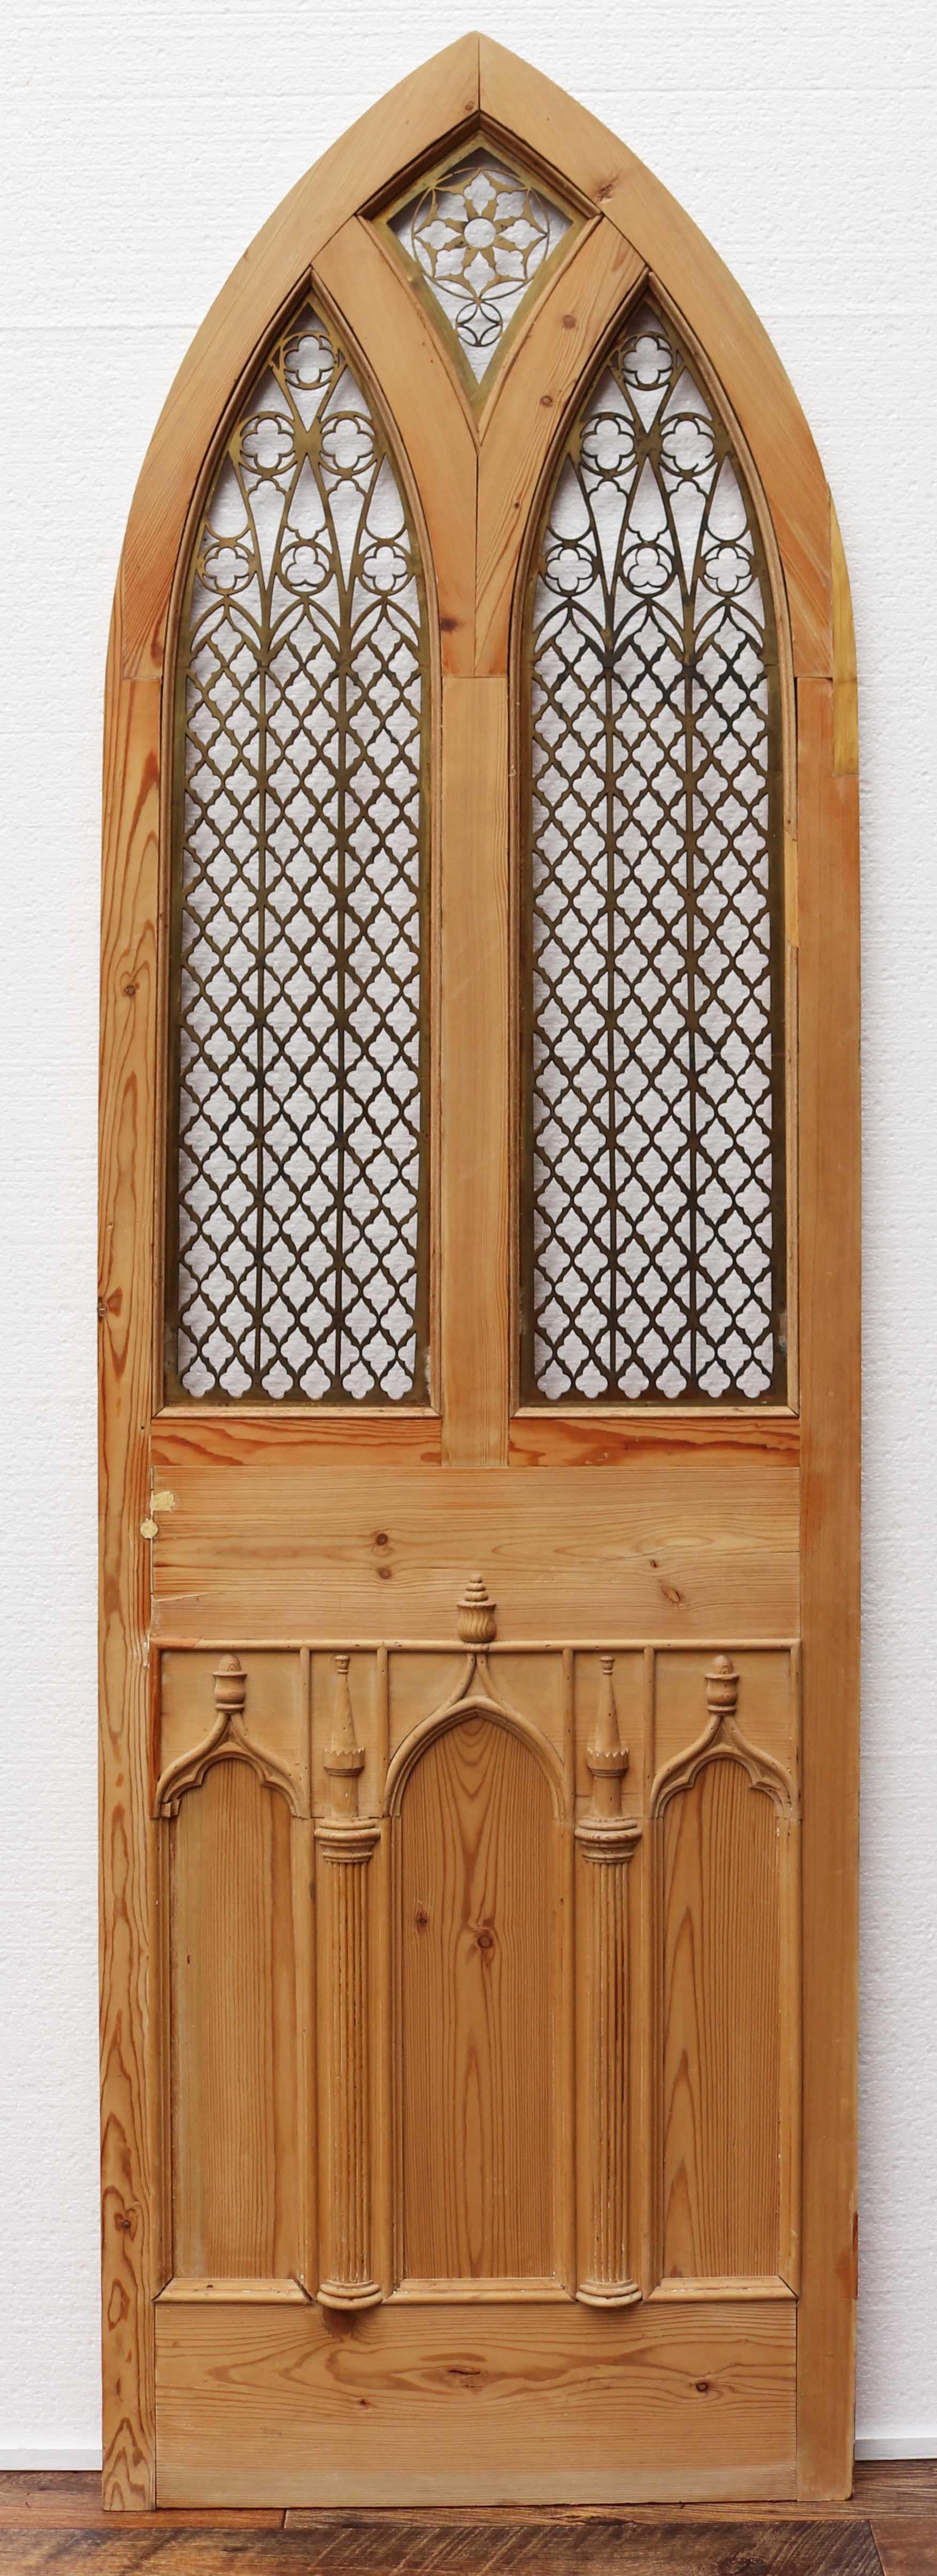 About

This unusual arched pine door features decorative pierced brass grills and decorative molding to the lower half.

We have two of these doors available.

Condition report

There is no glazing present. 

Style

Gothic,